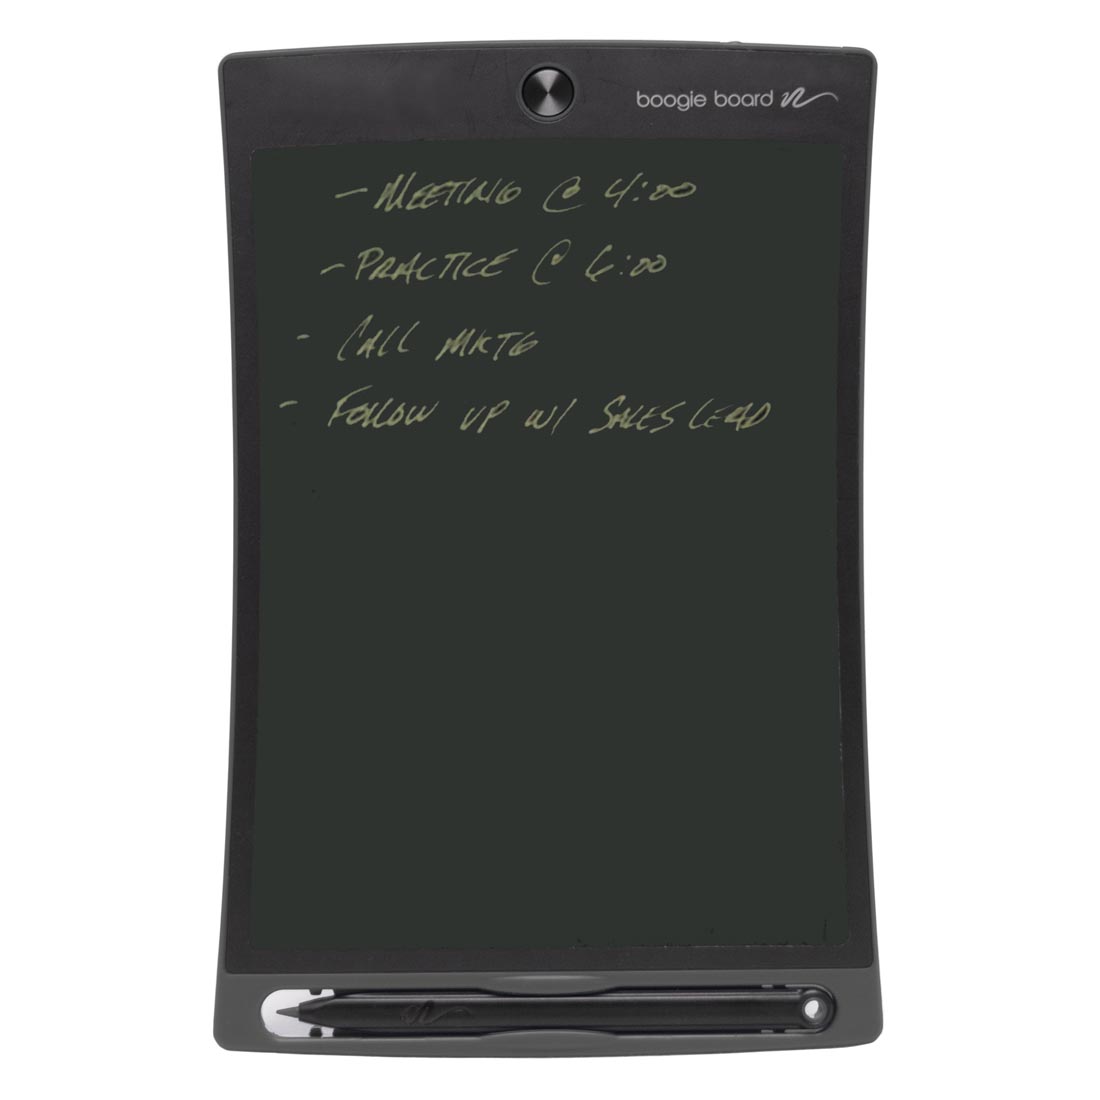 Gray Boogie Board Jot 8.5 LCD eWriter shown with a schedule checklist of Meeting, Practice, etc.